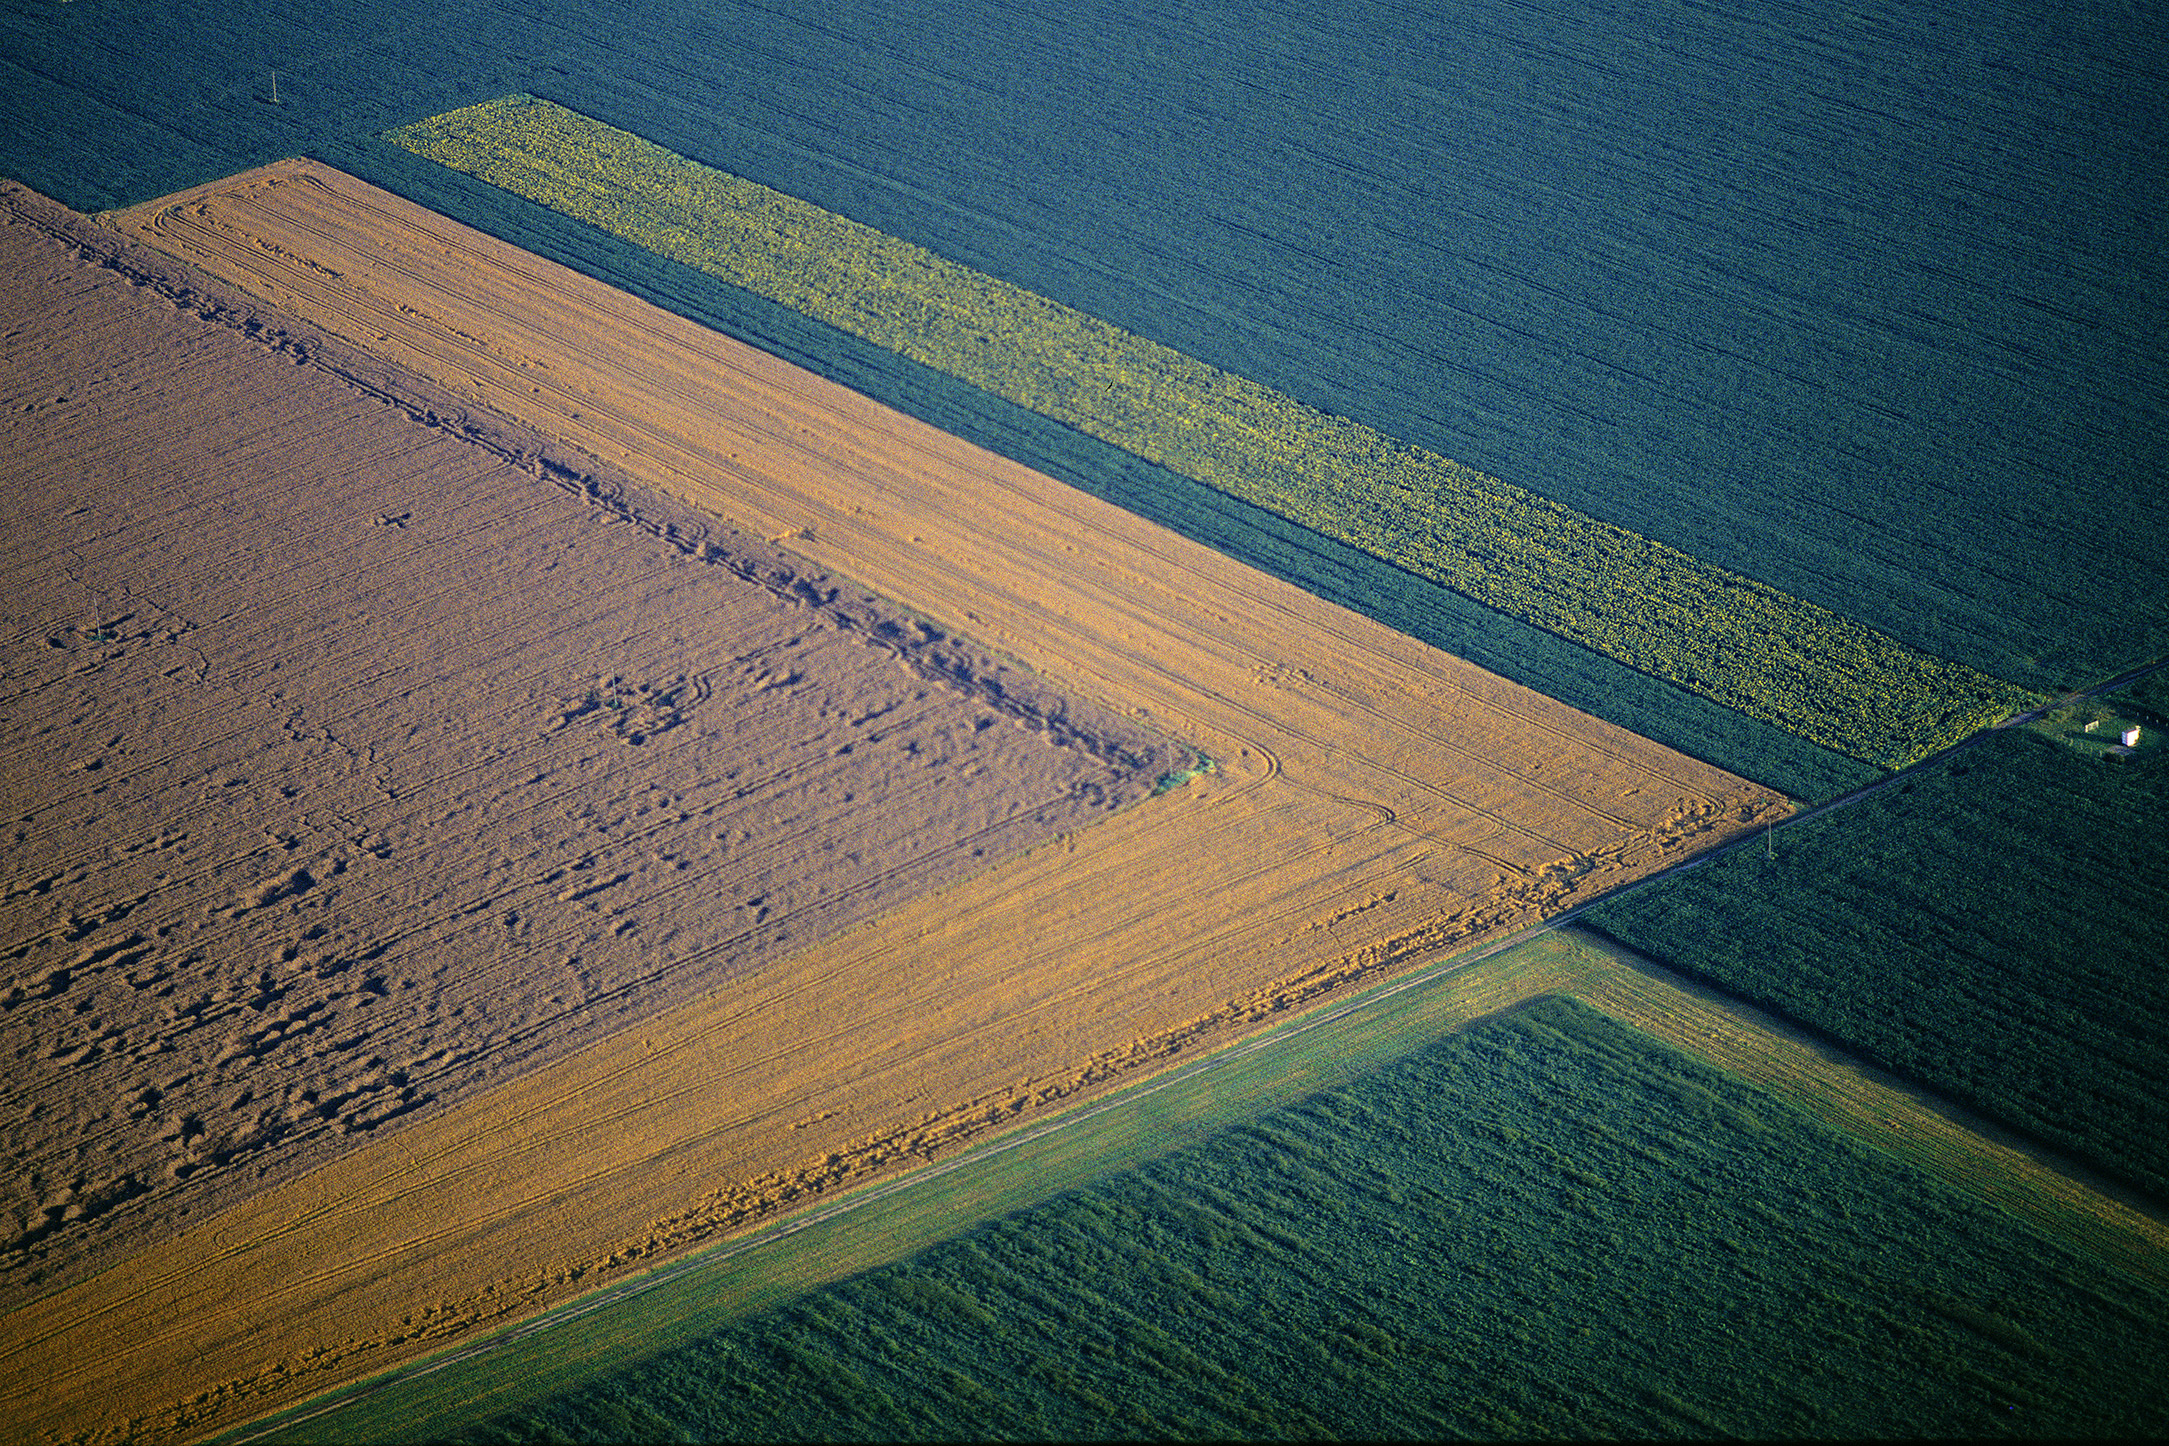 Georg Gerster, Harvesting rape, Hungary, 2009
Inkjet printed with pigmented Epson Ultra Chrome K3, on Epson Exhibition Fiber Paper
100 x 150 cm
Edition of 8 + 2 AP